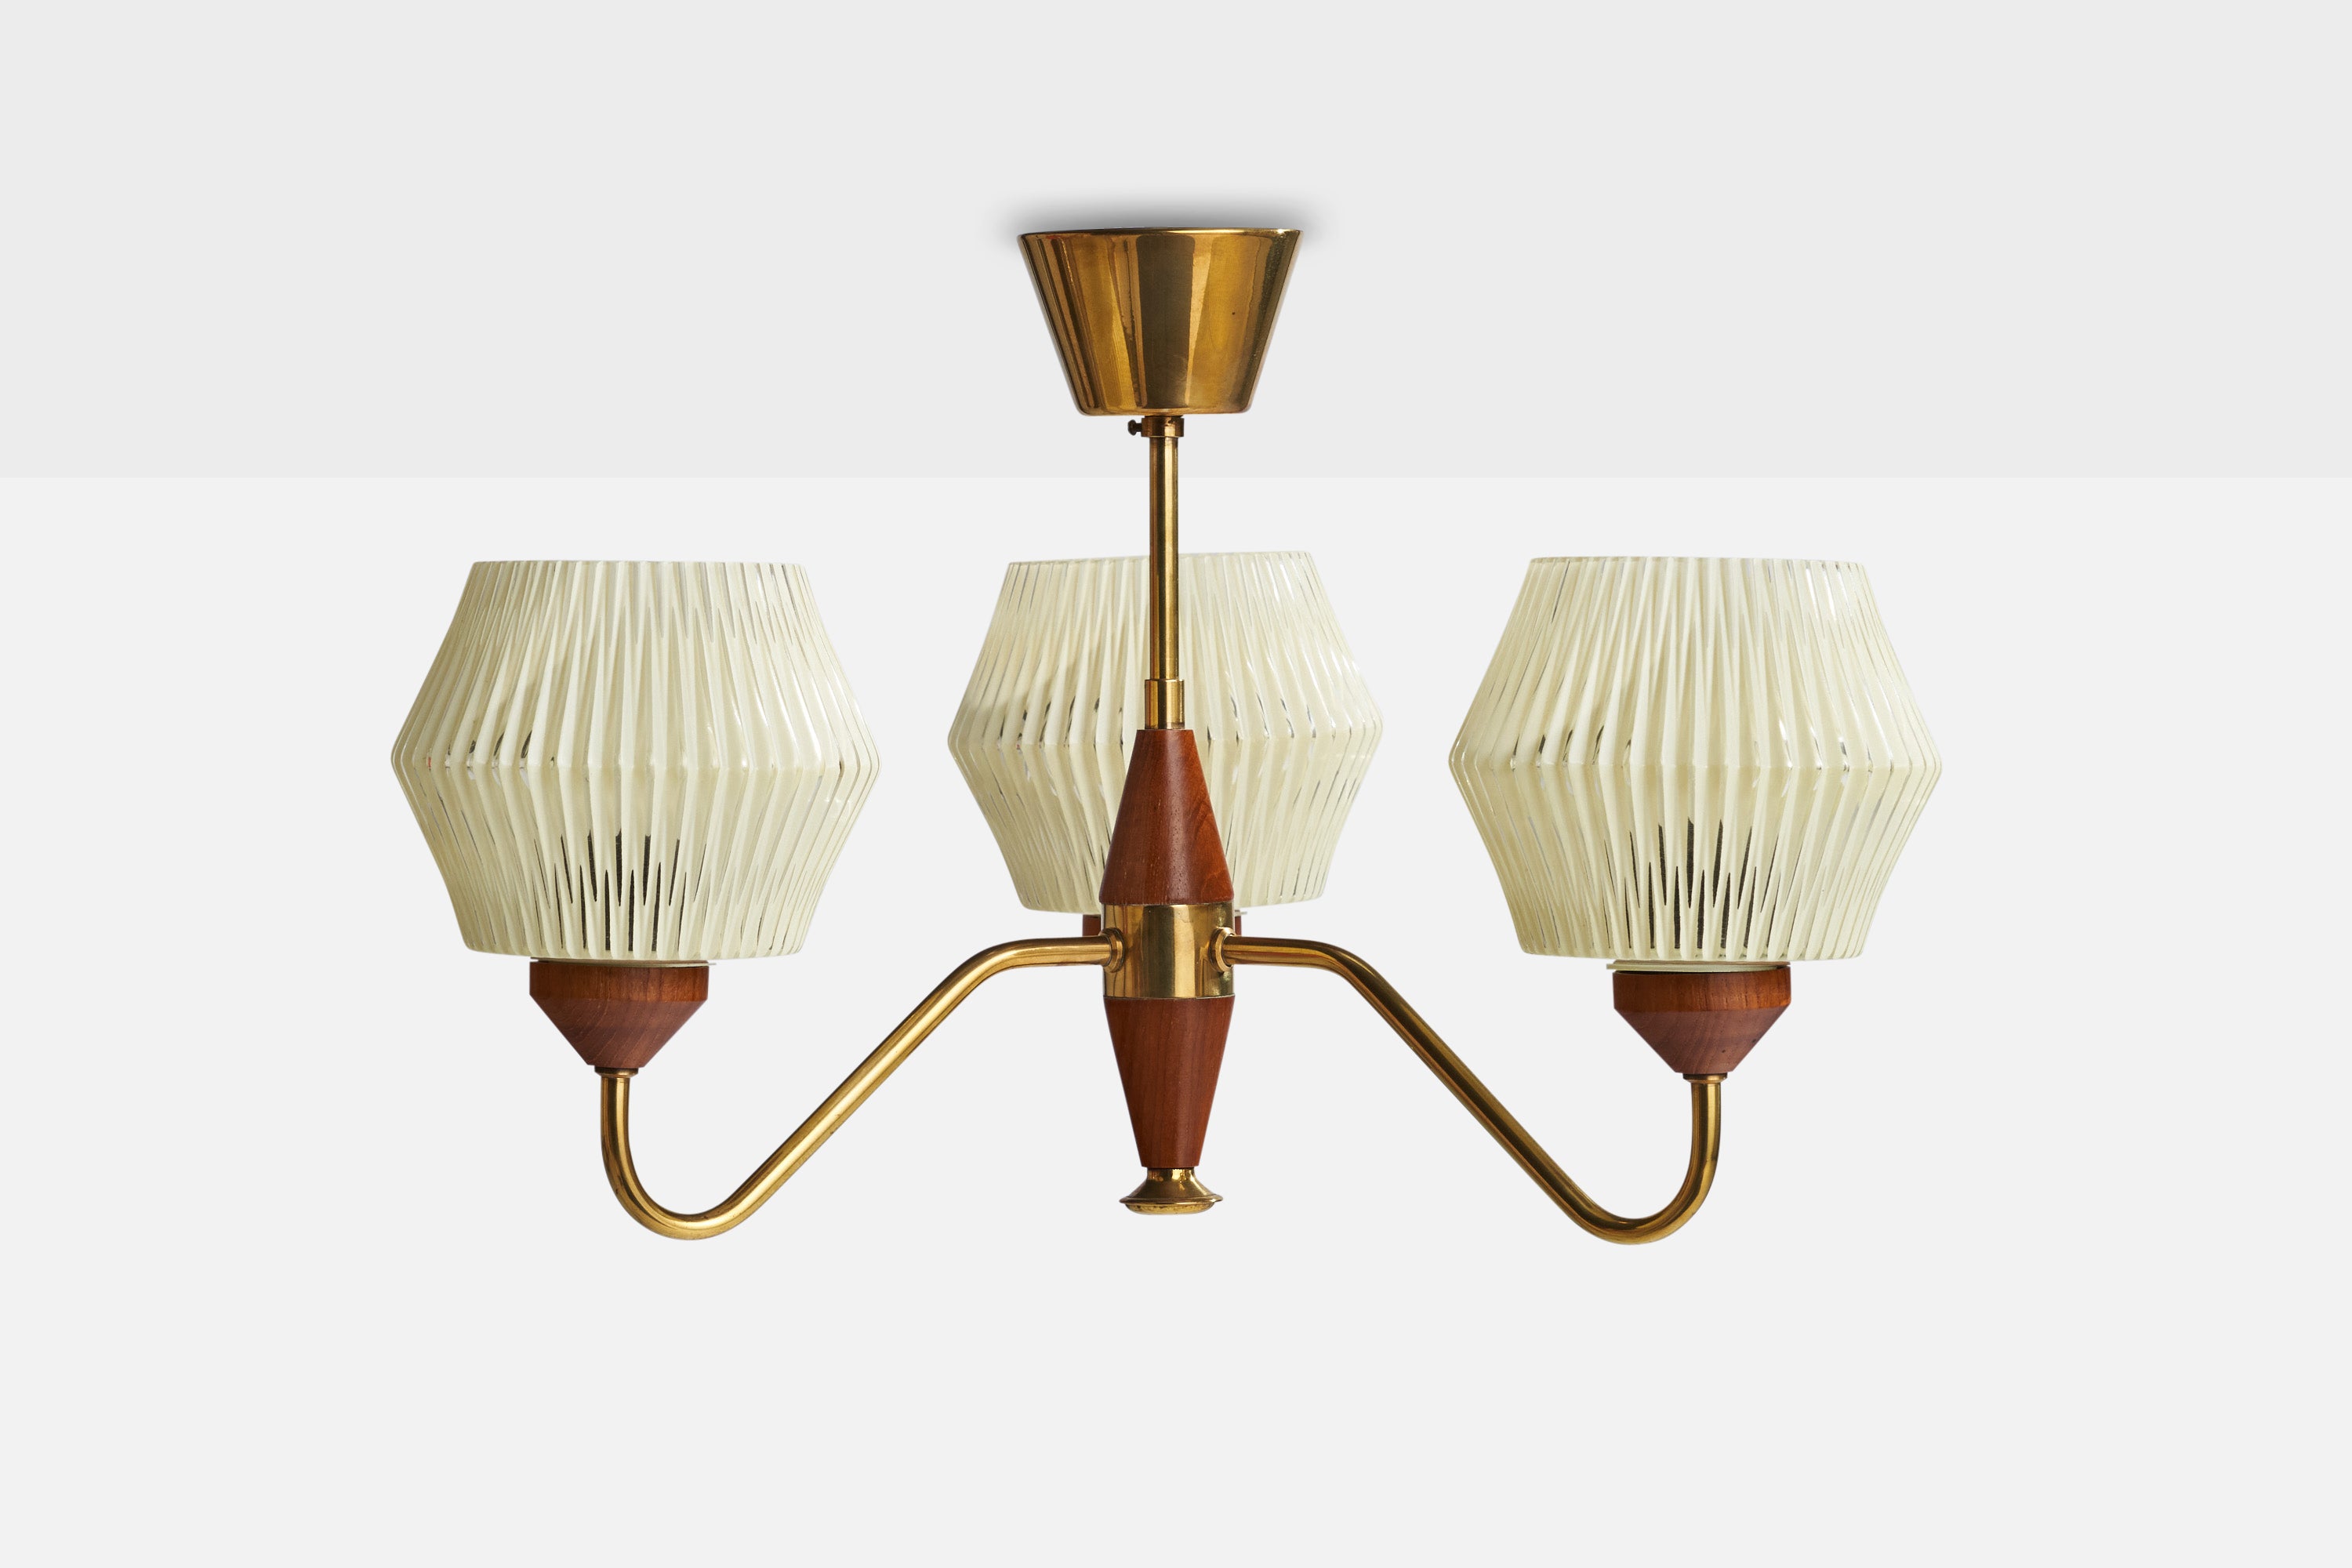 A three-armed brass, teak and etched glass chandelier designed and prodquced in Sweden, 1950s.

Dimensions of canopy (inches): 2.5” H x 3.5”  Diameter
Socket takes standard E-26 bulbs. 3 sockets.There is no maximum wattage stated on the fixture. All